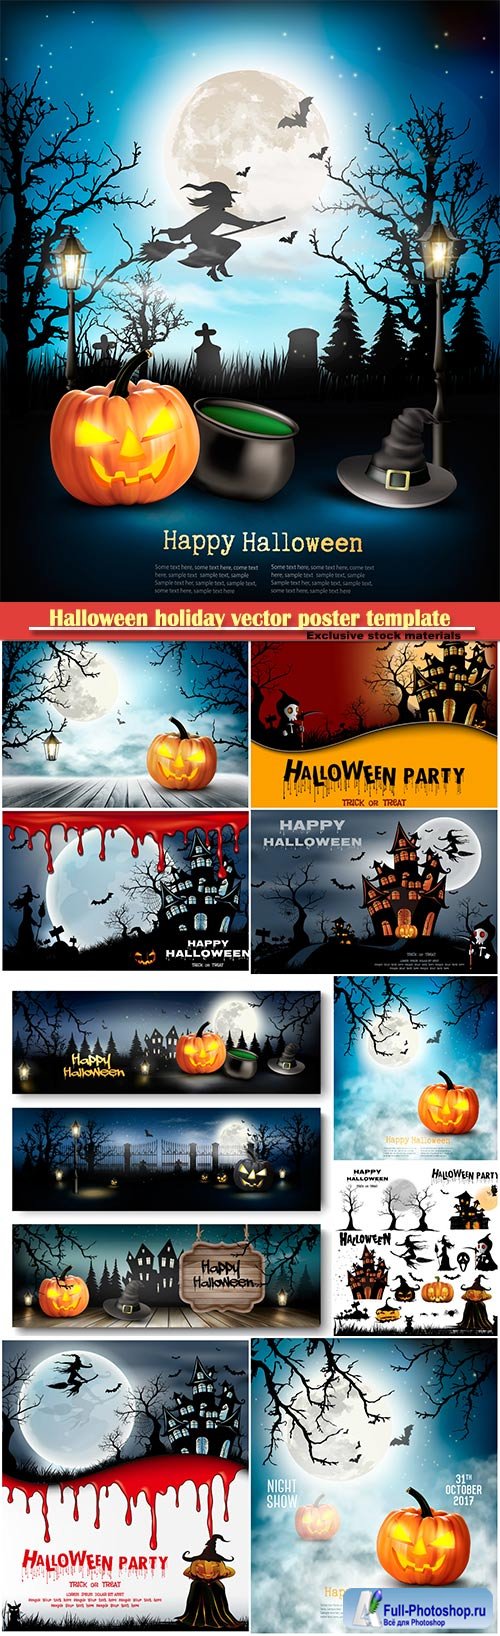 Halloween holiday vector poster template with pumpkin and moon